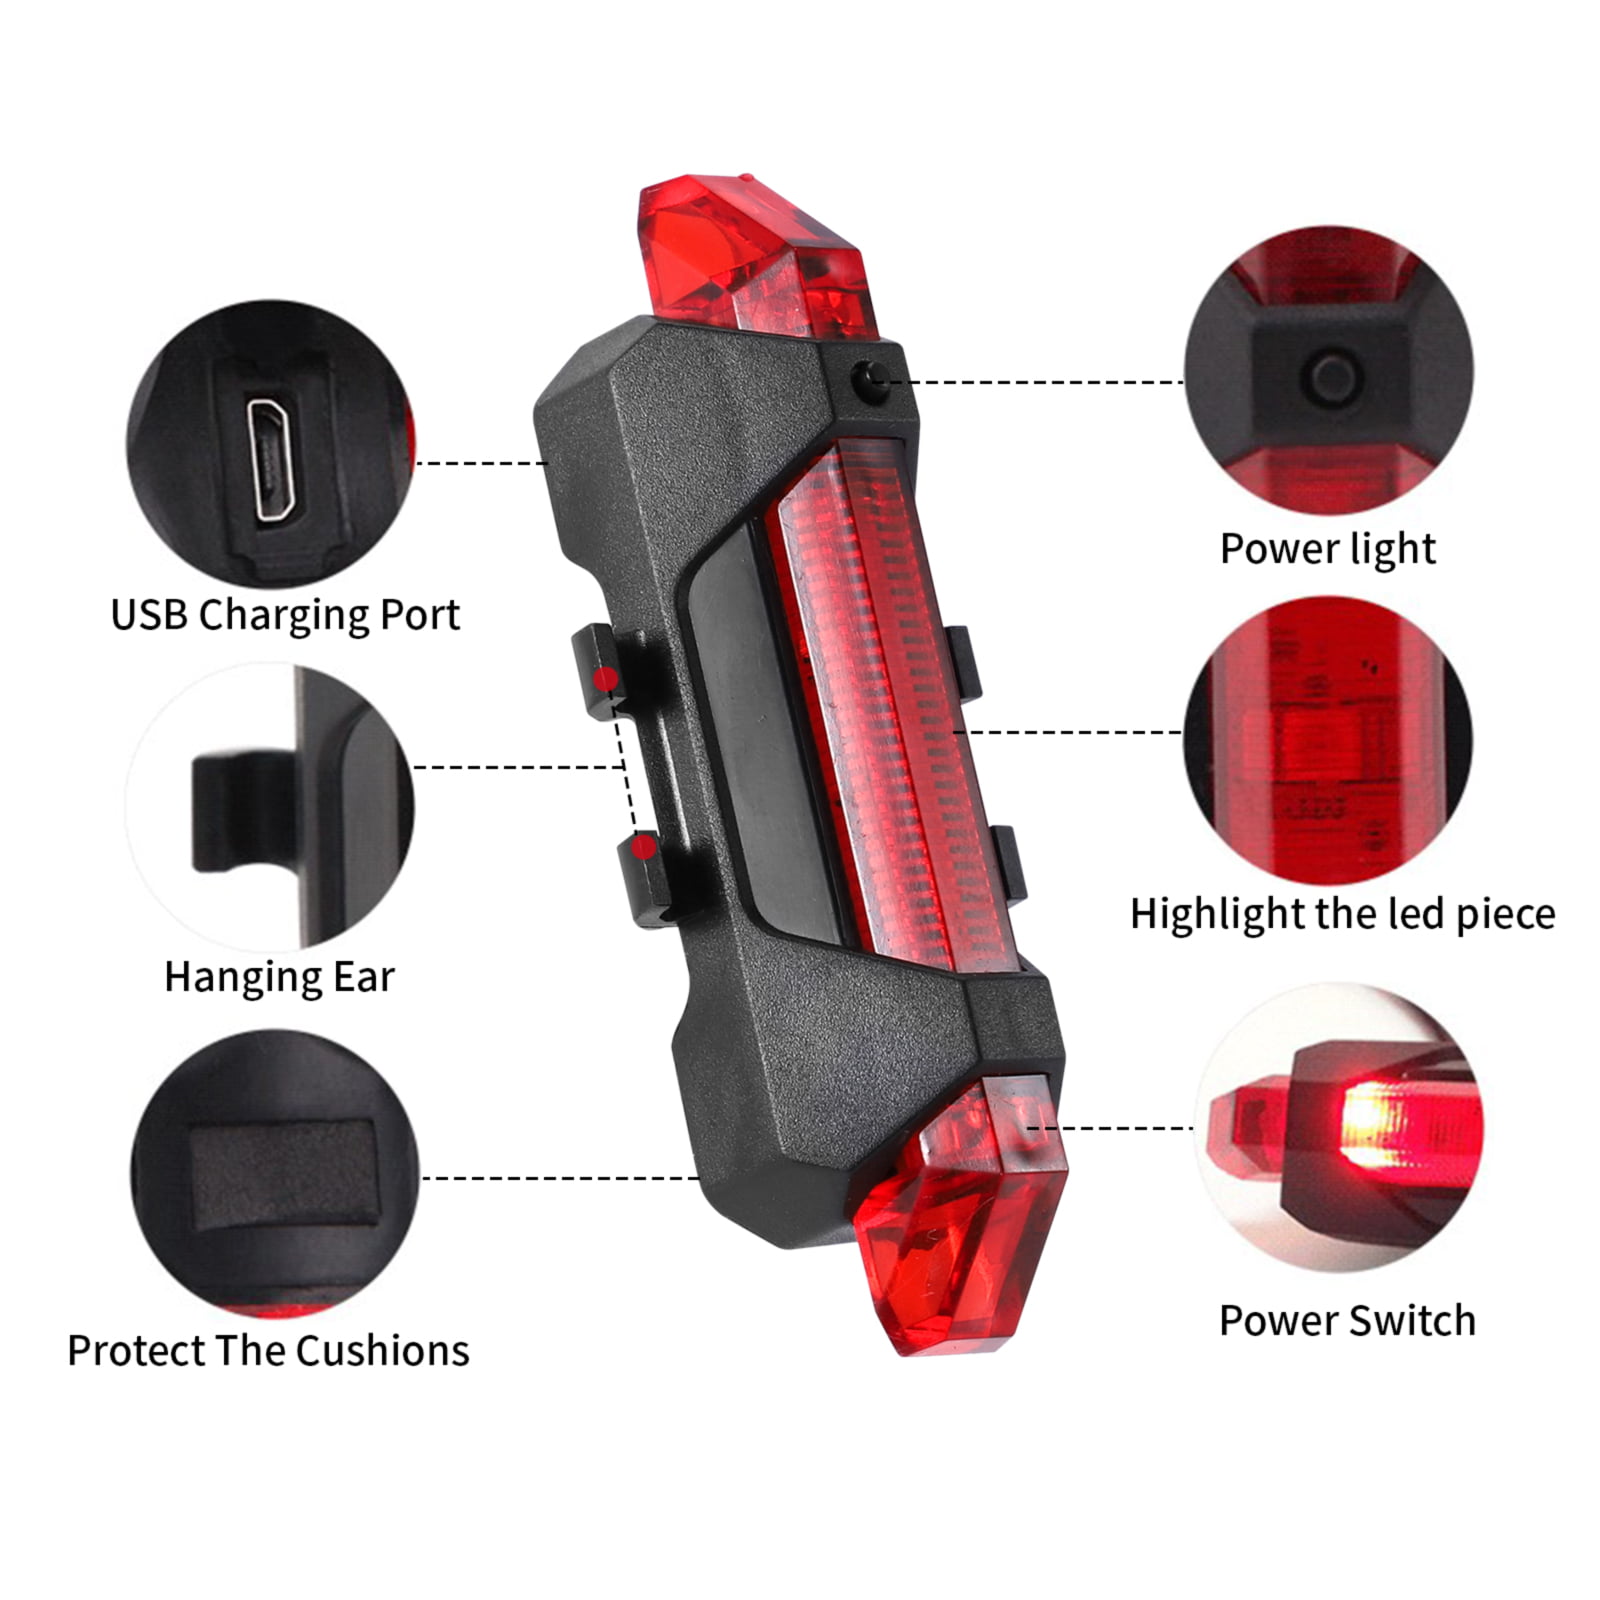 5 LED USB Rechargeable Bike Tail Light Bicycle Safety Cycling Warning Rear Lamp